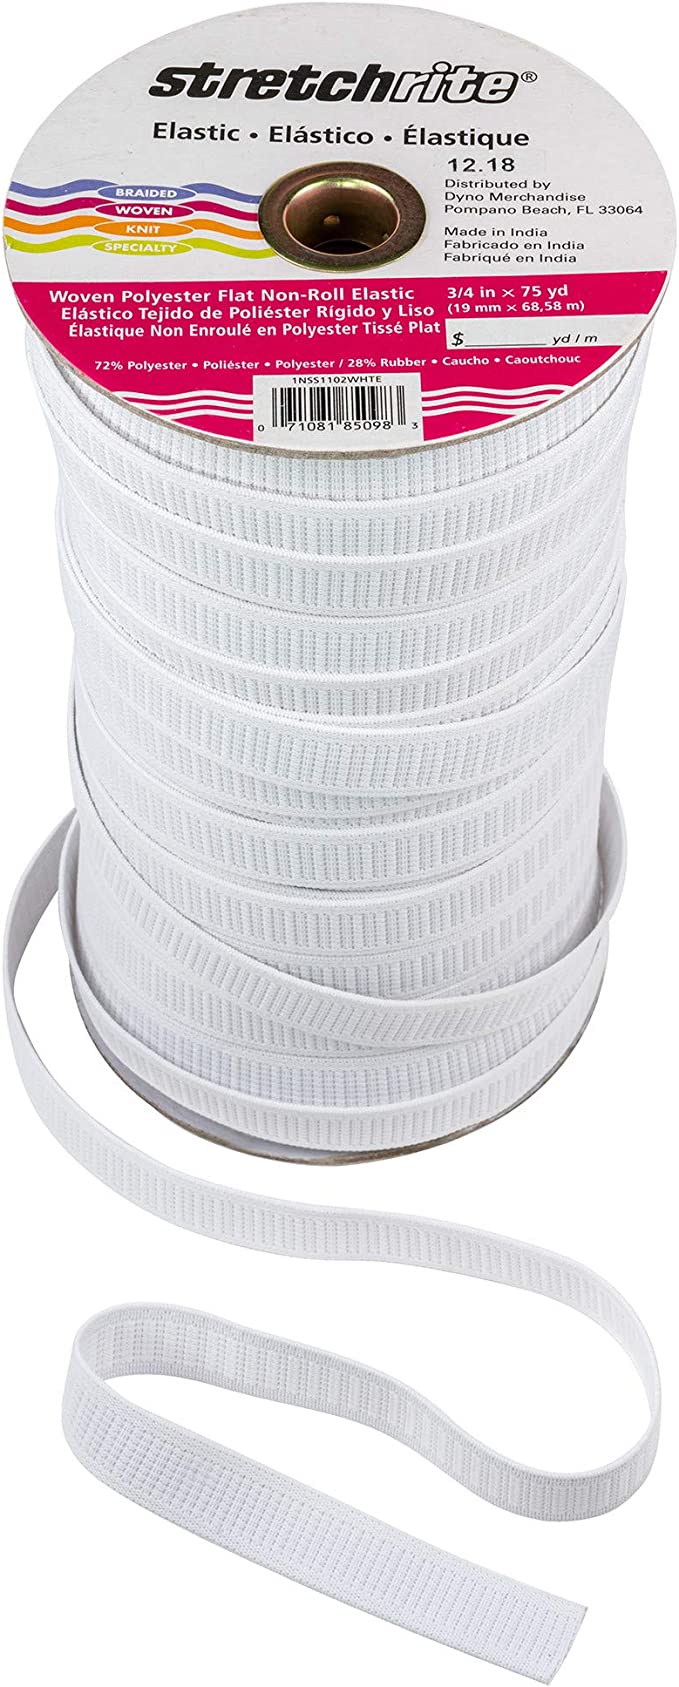 Stretchrite Woven Polyester Elastic Spool, 3/4-Inch by 75-Yard, White